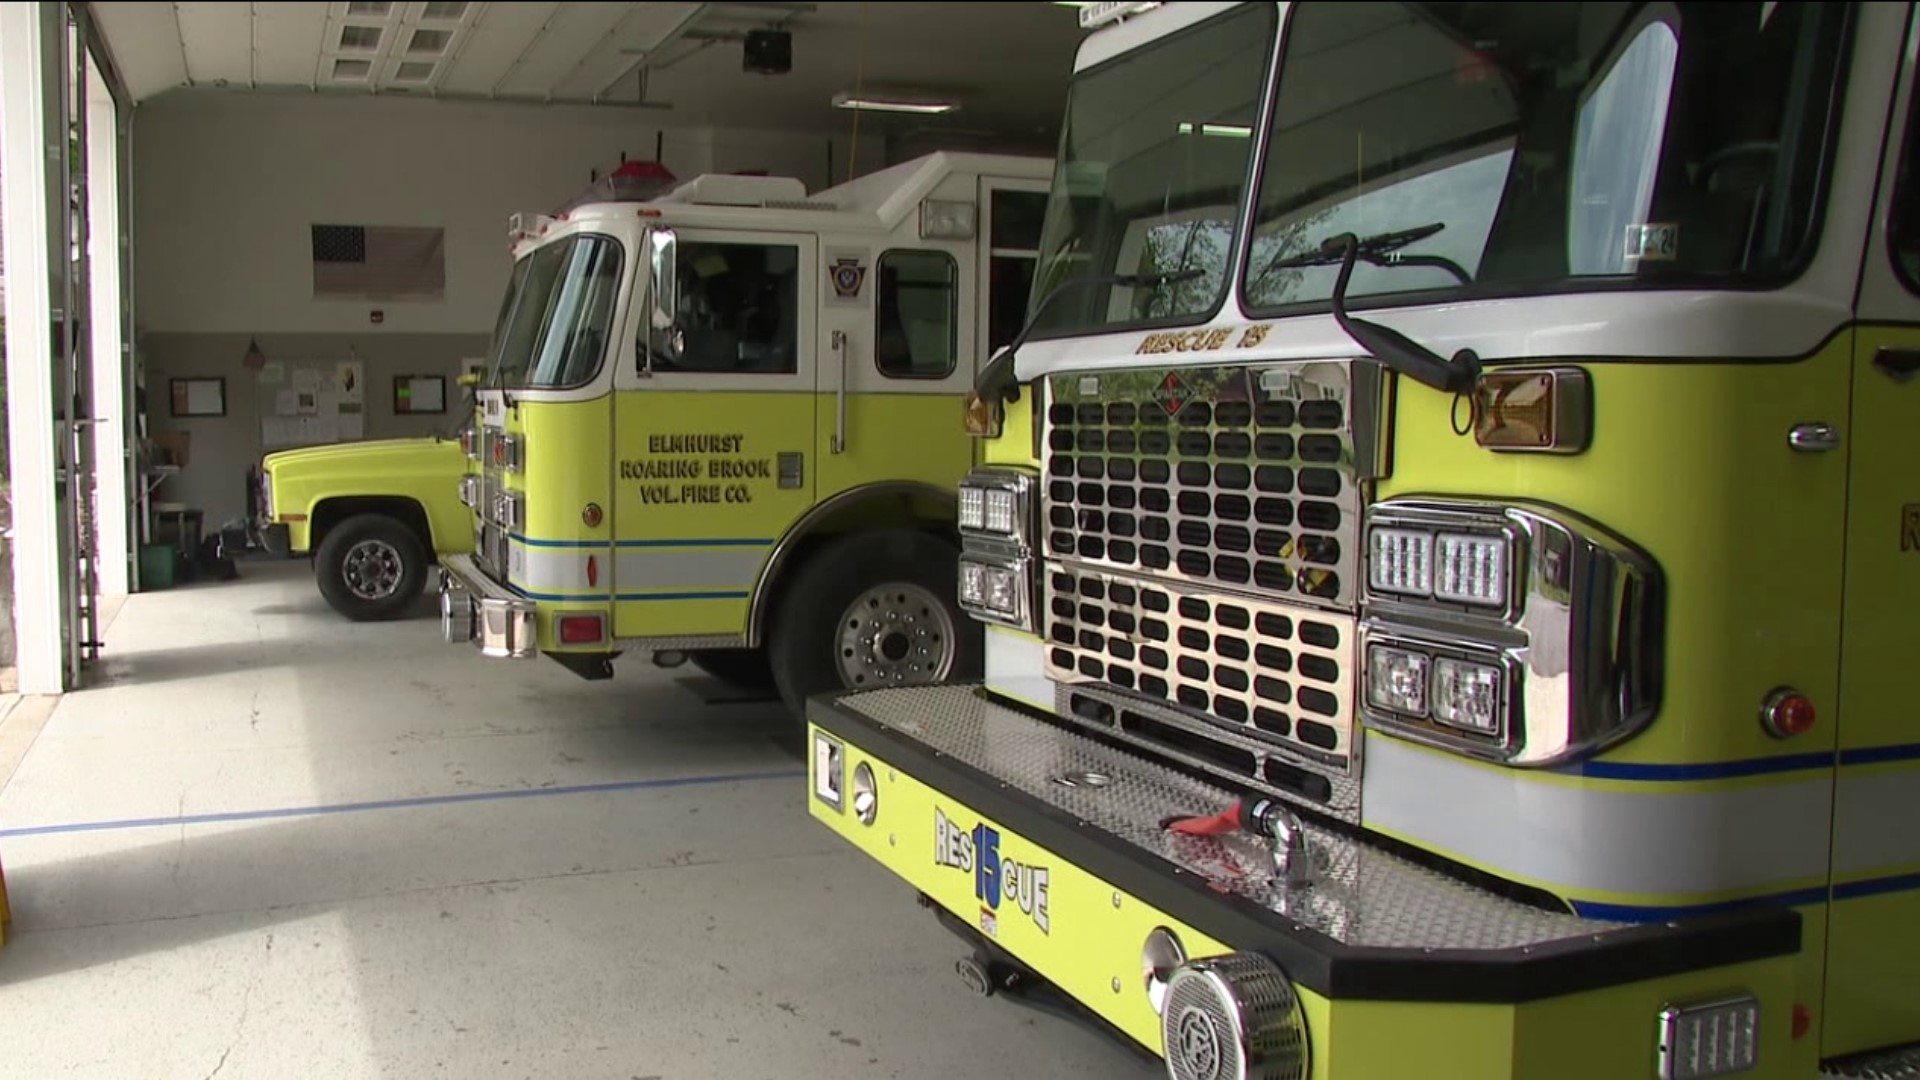 Members of volunteer fire companies in one part of Lackawanna County have teamed up to help one another with fundraisers this summer.